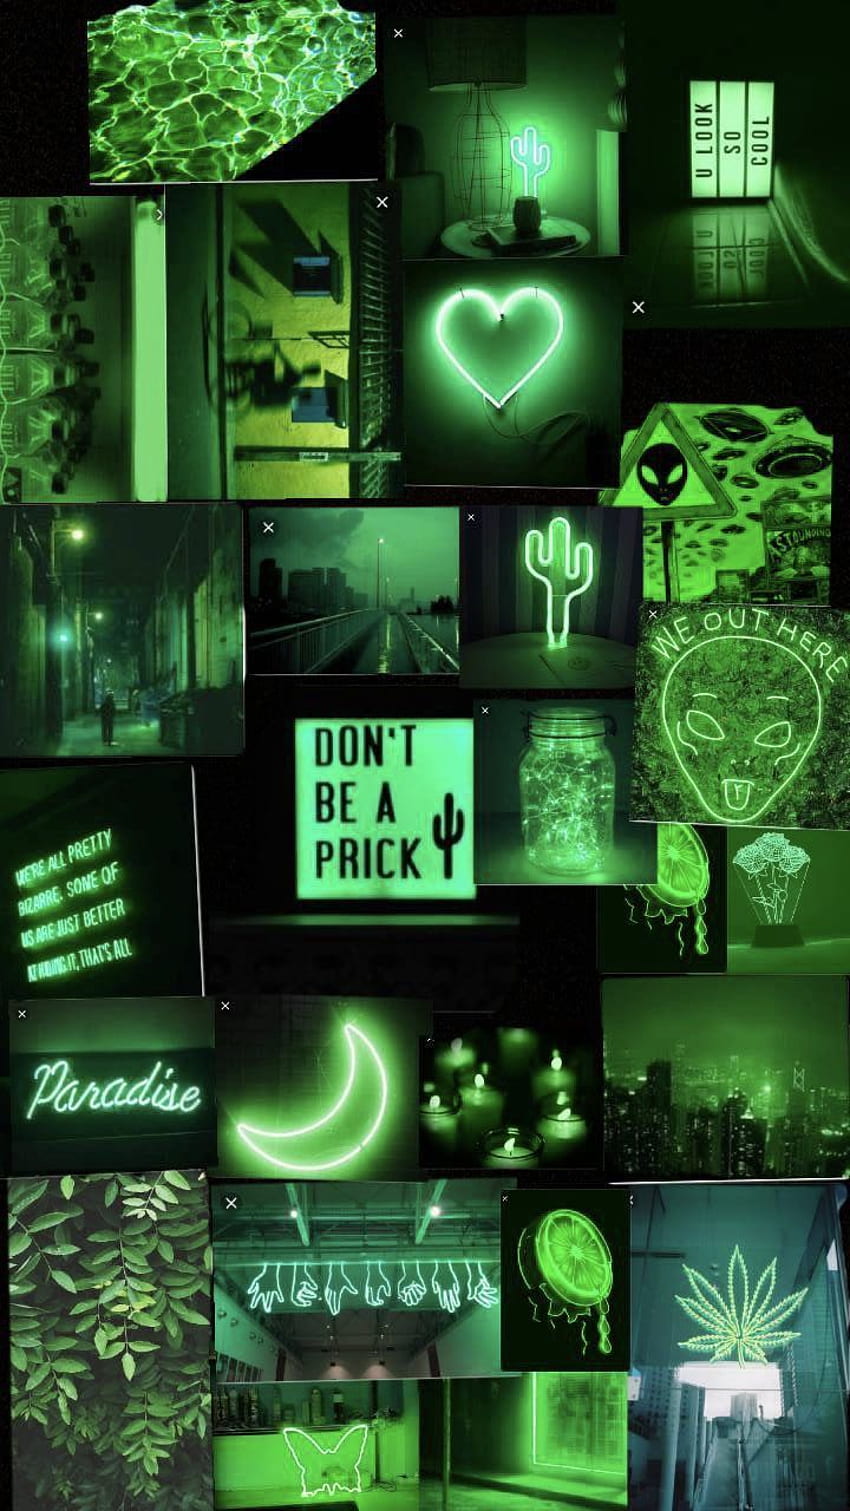 Aesthetic green background with pictures of plants, neon signs, and cacti - Technology, light green, dark green, soft green, lime green, neon green, Gemini